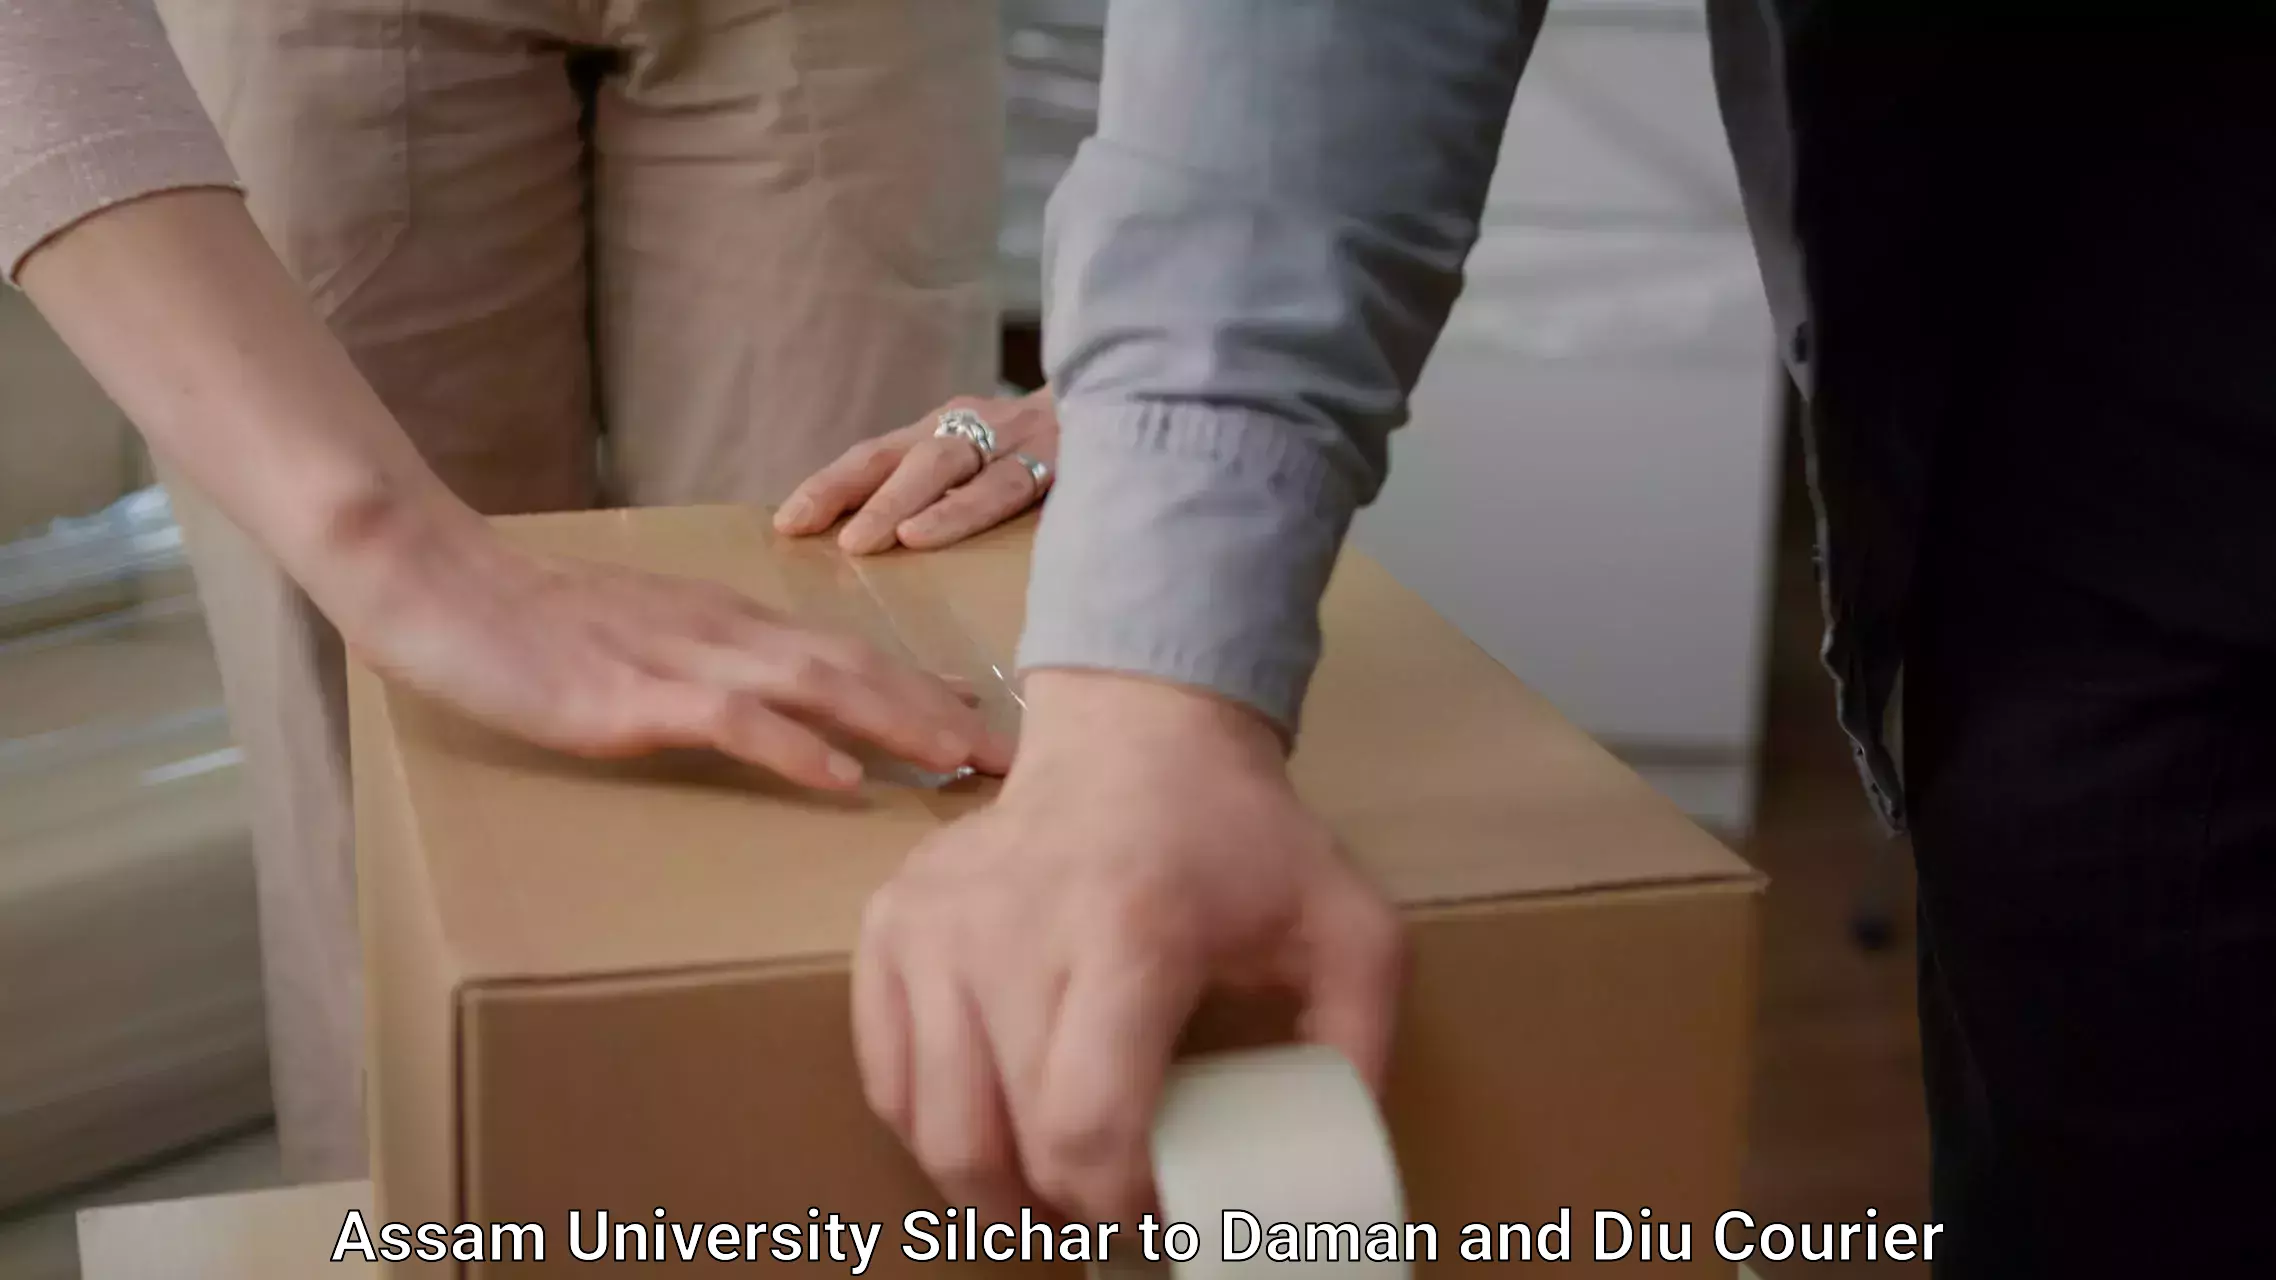 Budget-friendly moving services in Assam University Silchar to Daman